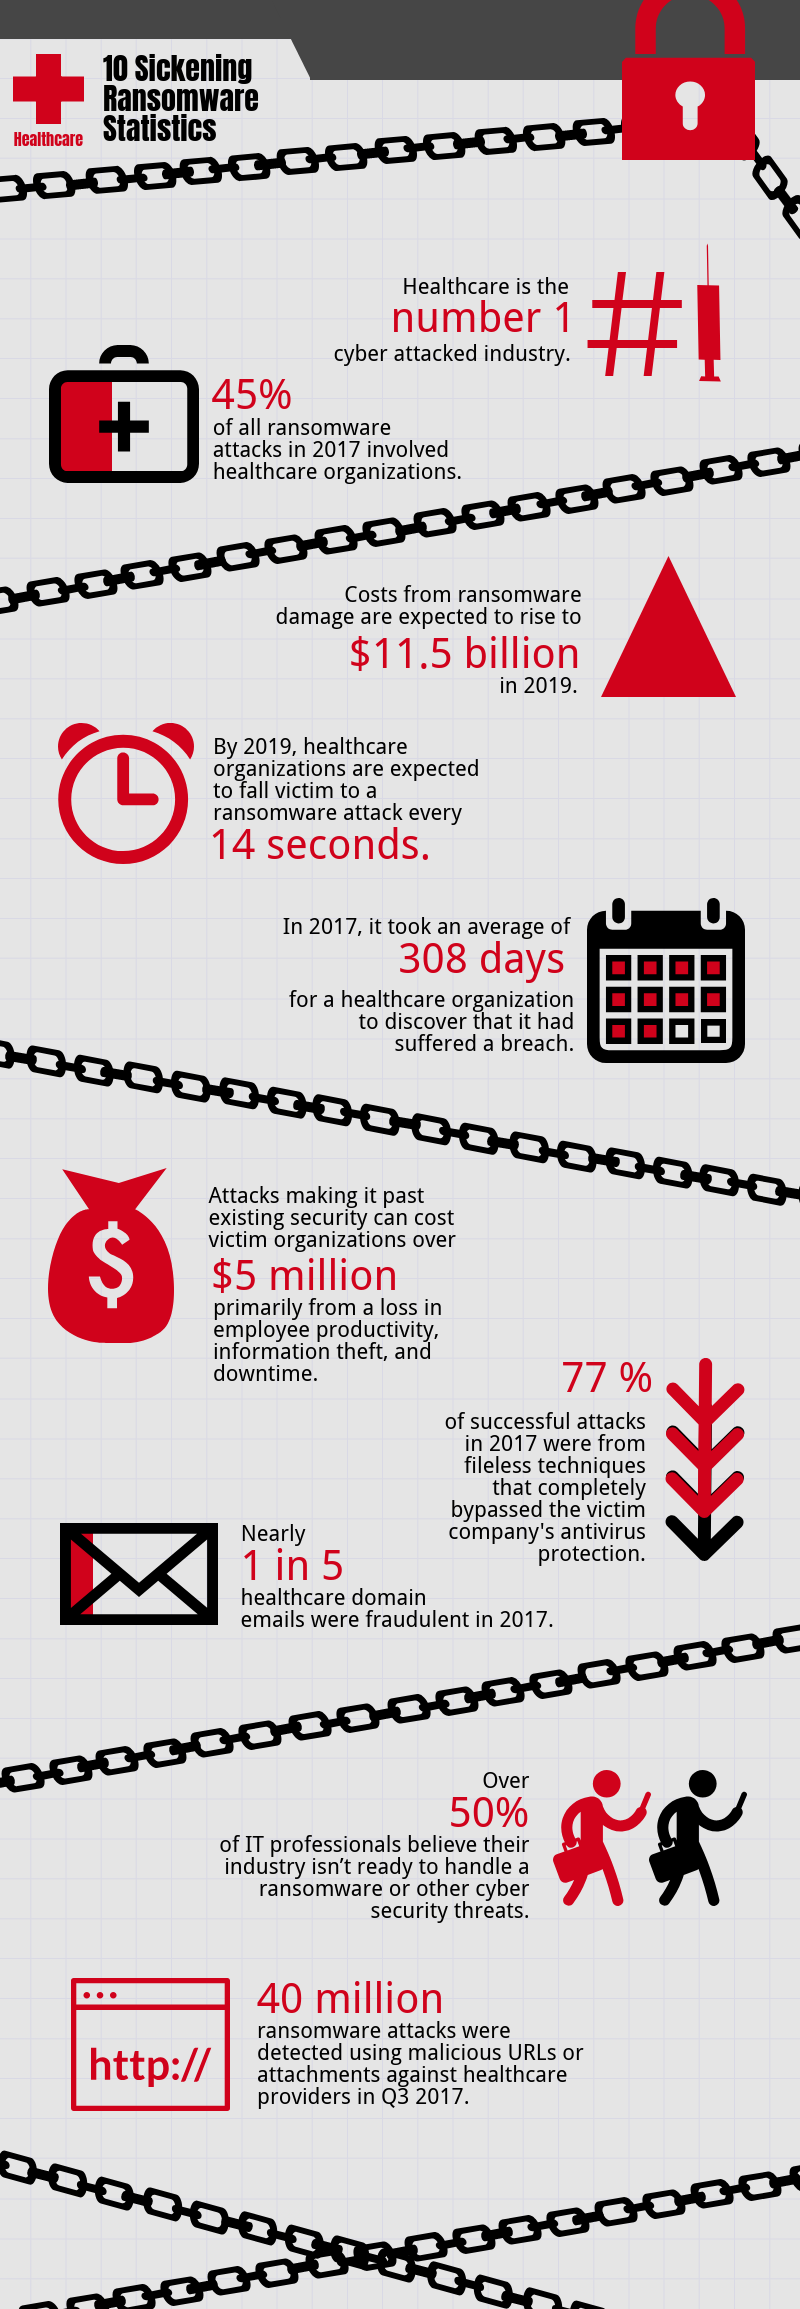 healthcare ransomware statistics infographic